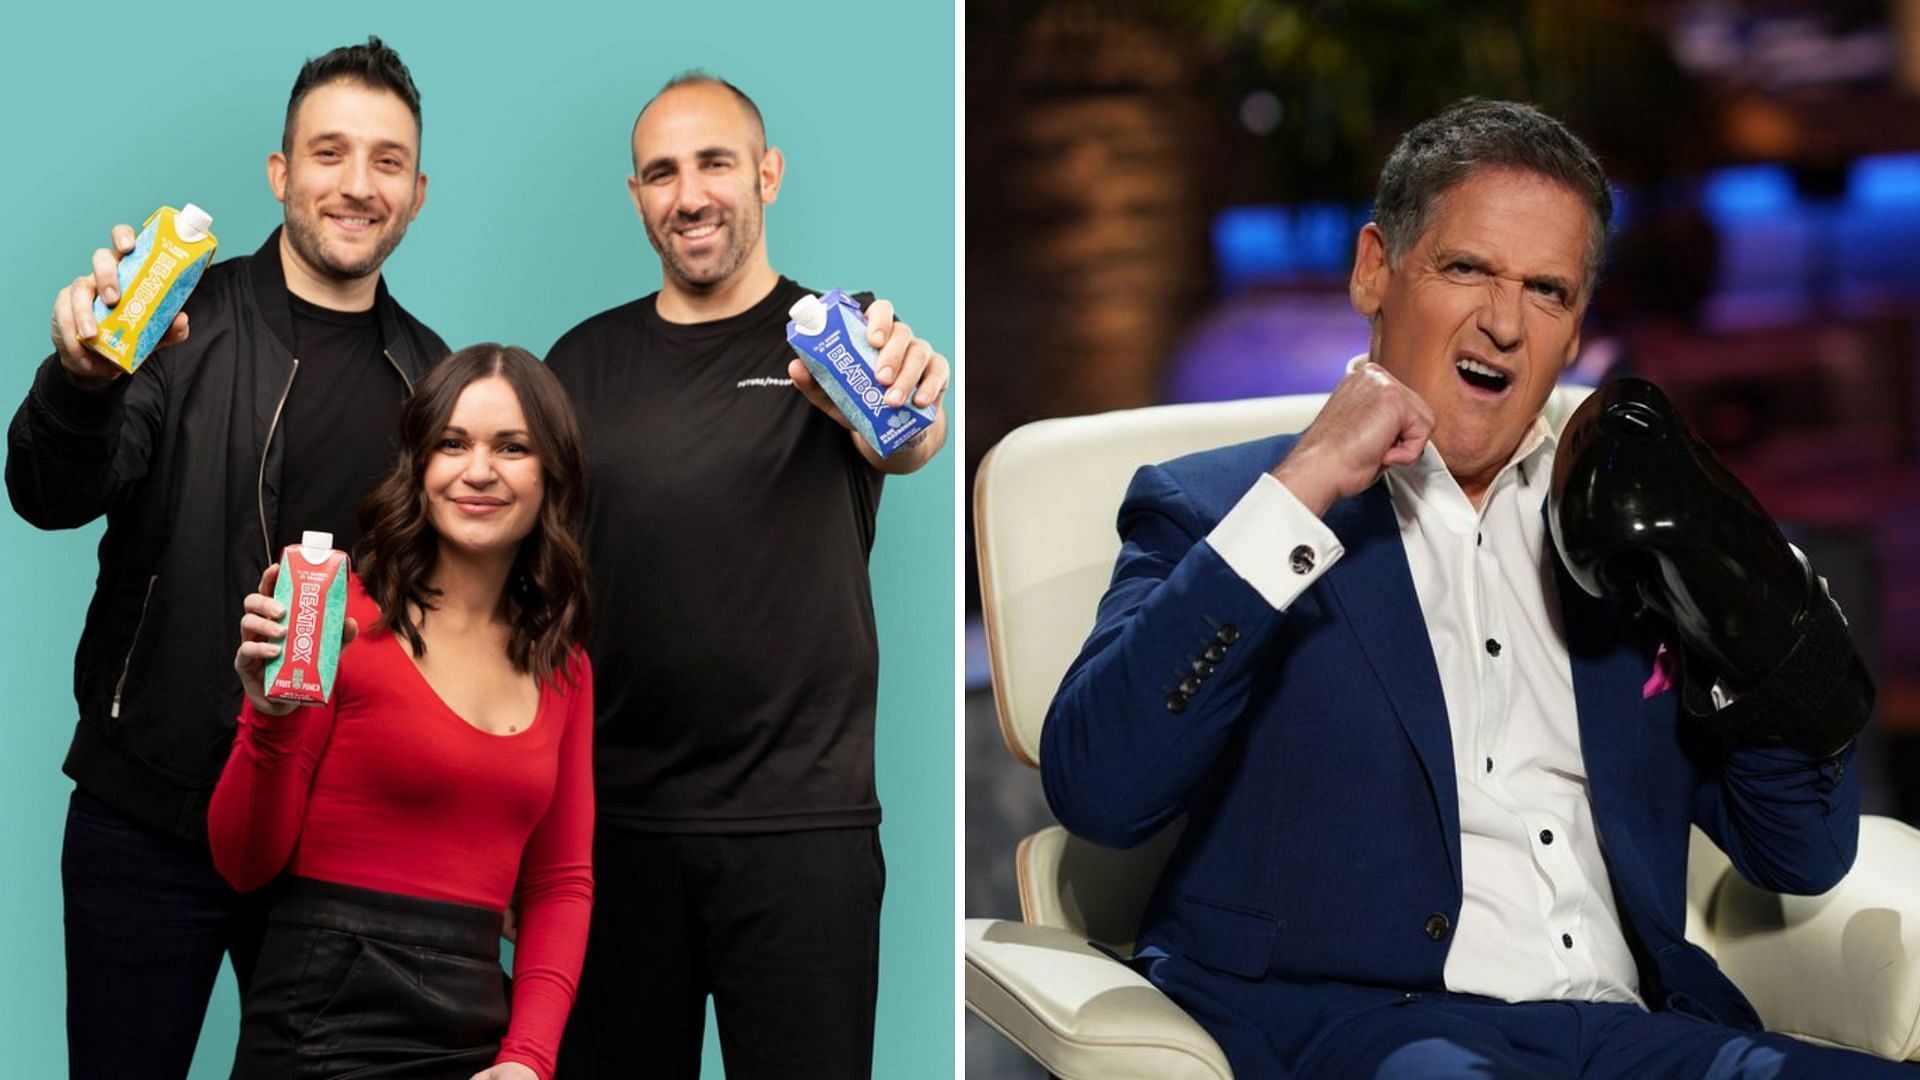 Mark Cuban invested Beatbox Beverages are set to appear on Shark Tank Season 14